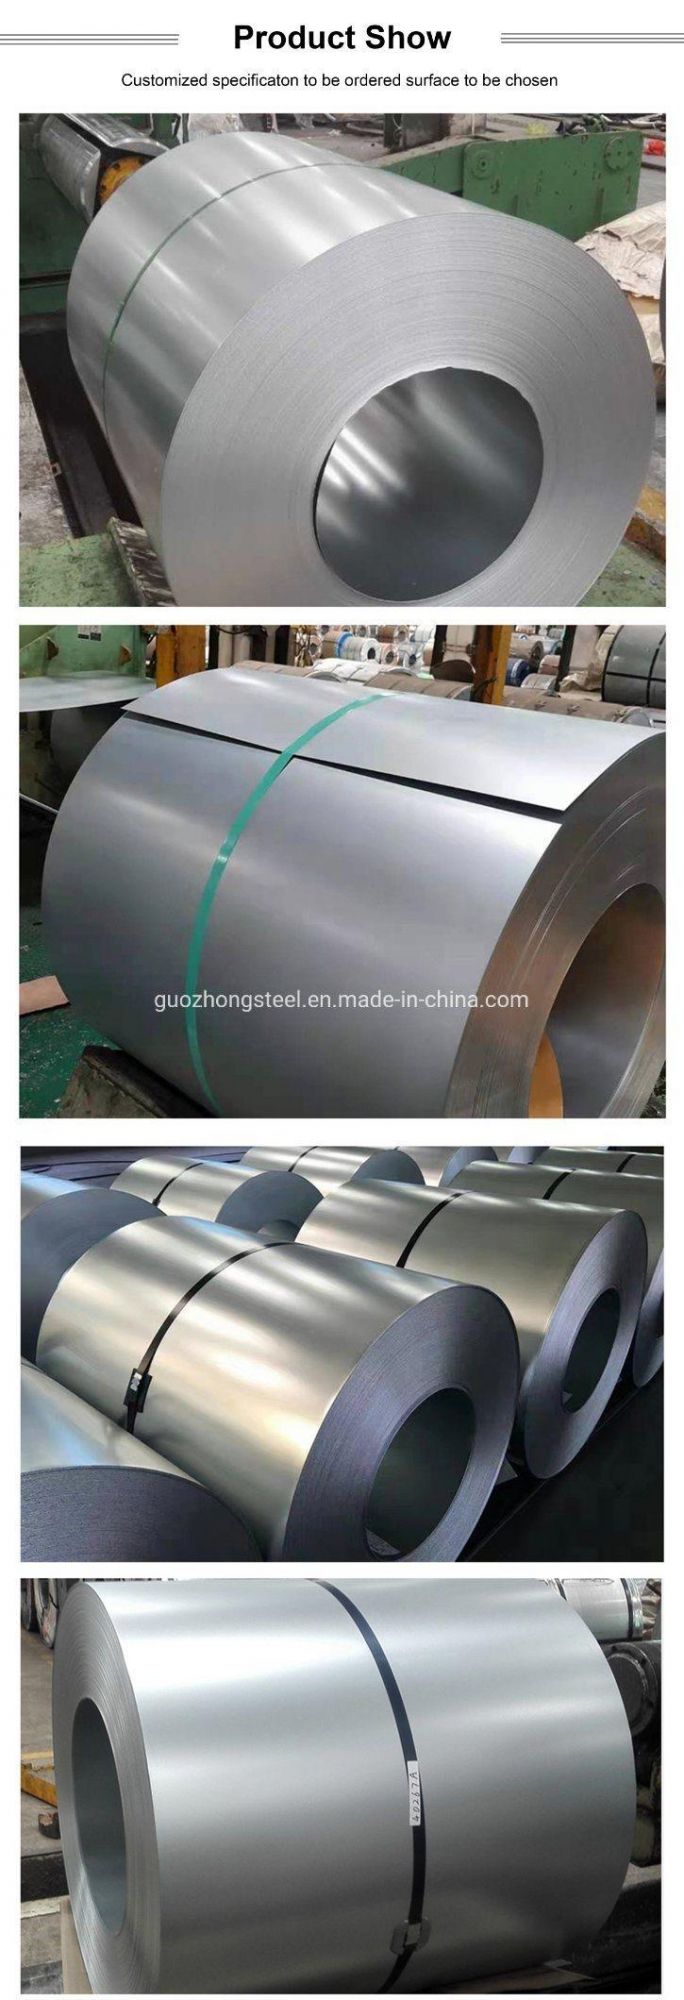 Guozhong Hot Sale CGCC Galvanized Steel Coil for Sale